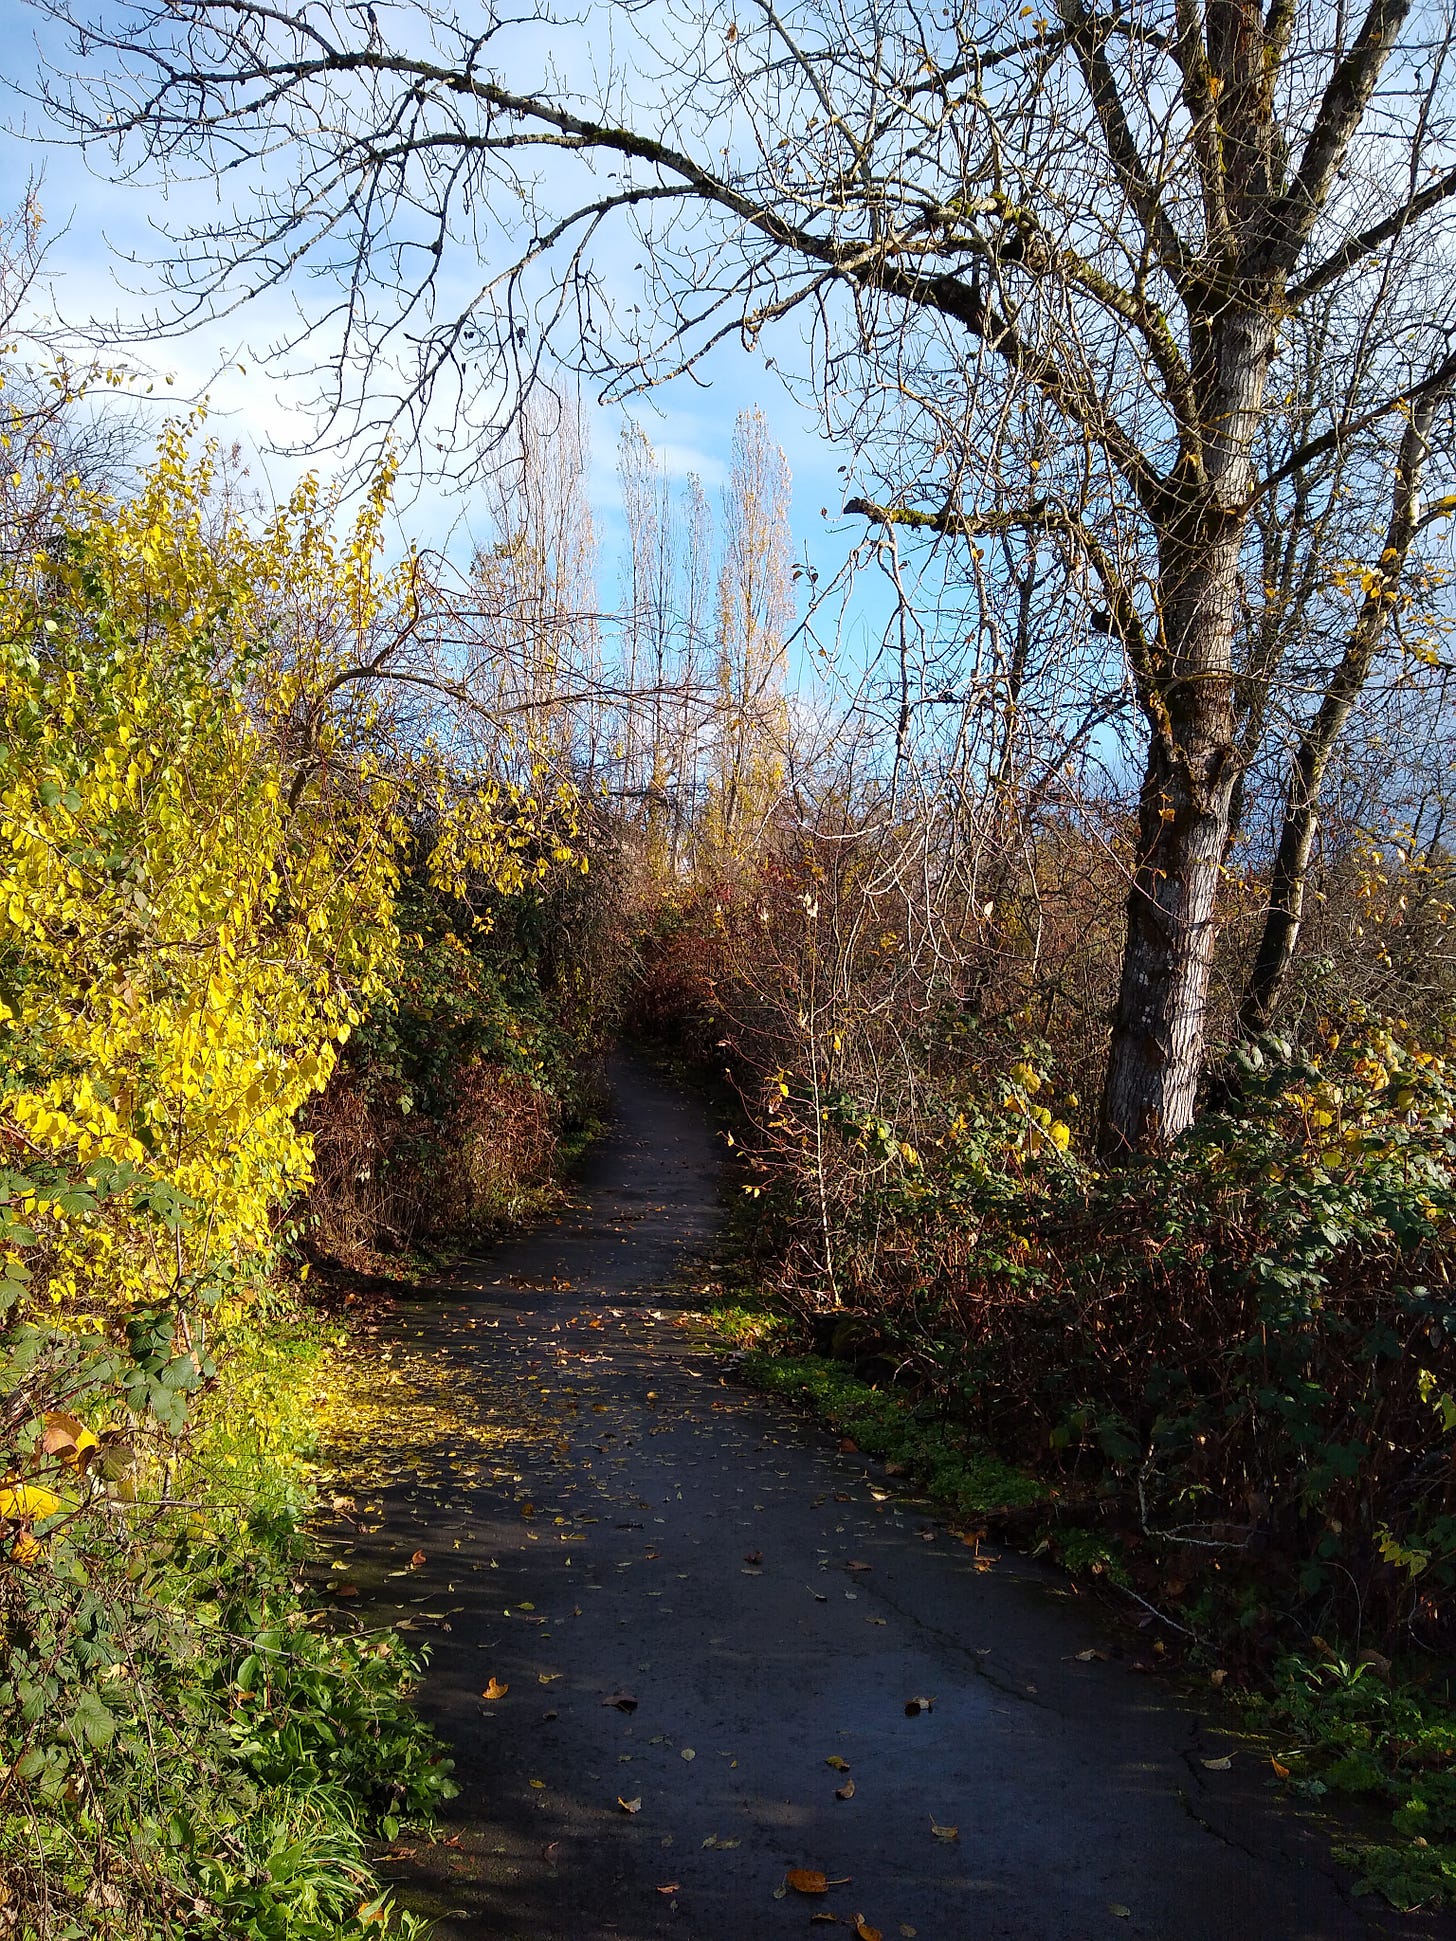 A trail through trees and brush, some bare, some with yellow leaves